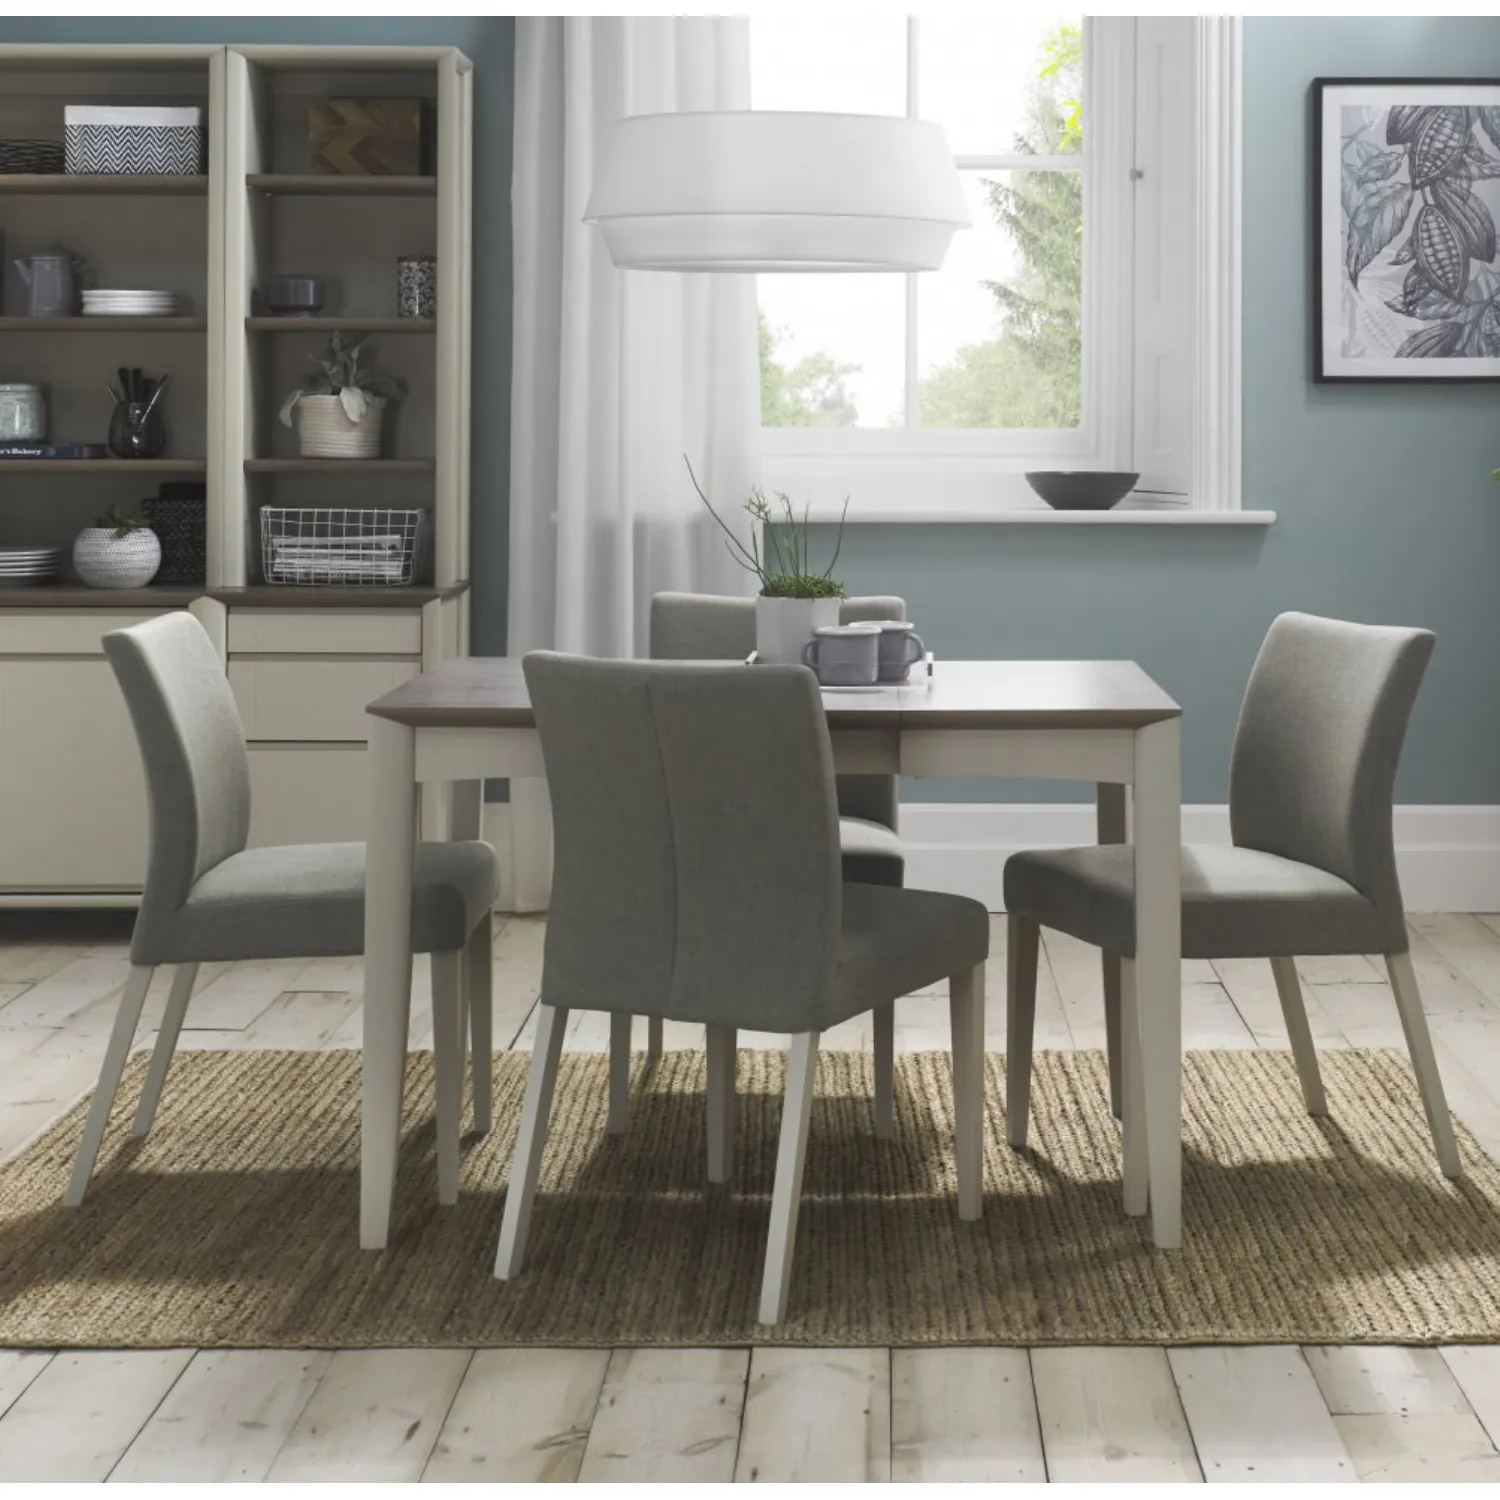 Washed Oak Dining Table Set 4 Grey Washed Chairs in Fabric